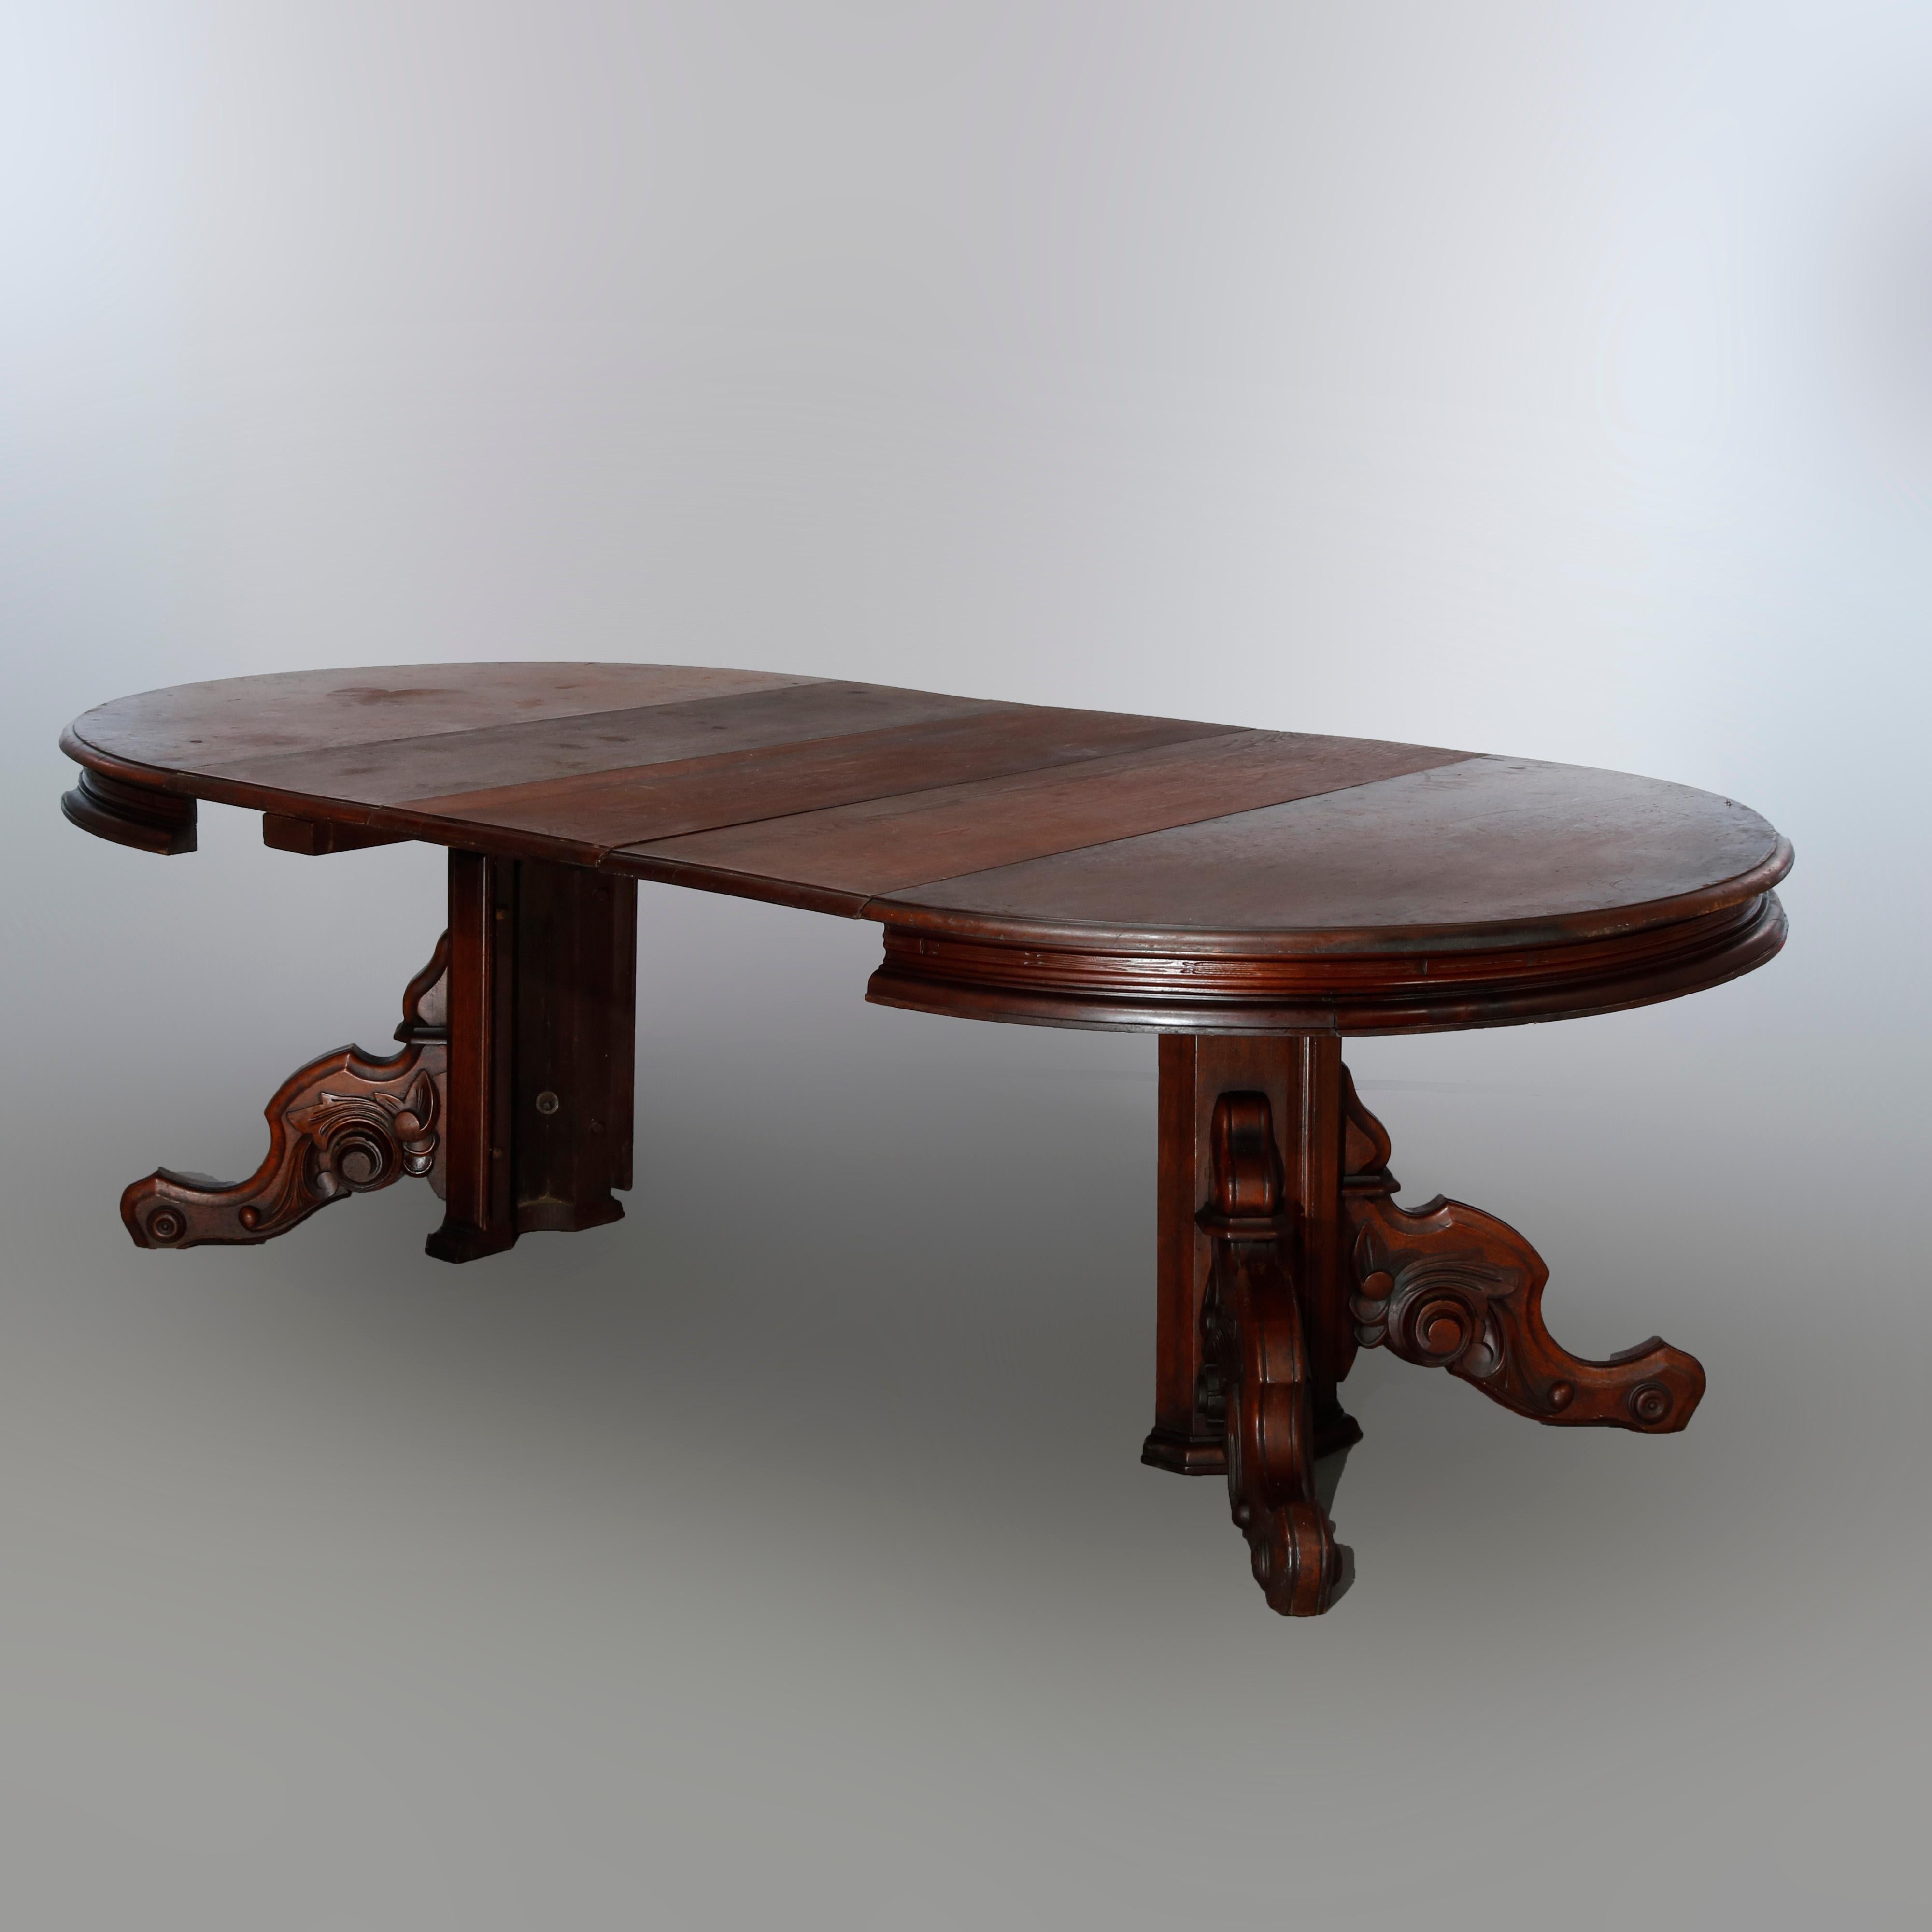 Antique Renaissance Revival Carved Walnut Extension Dining Table & Leaves, c1880 3